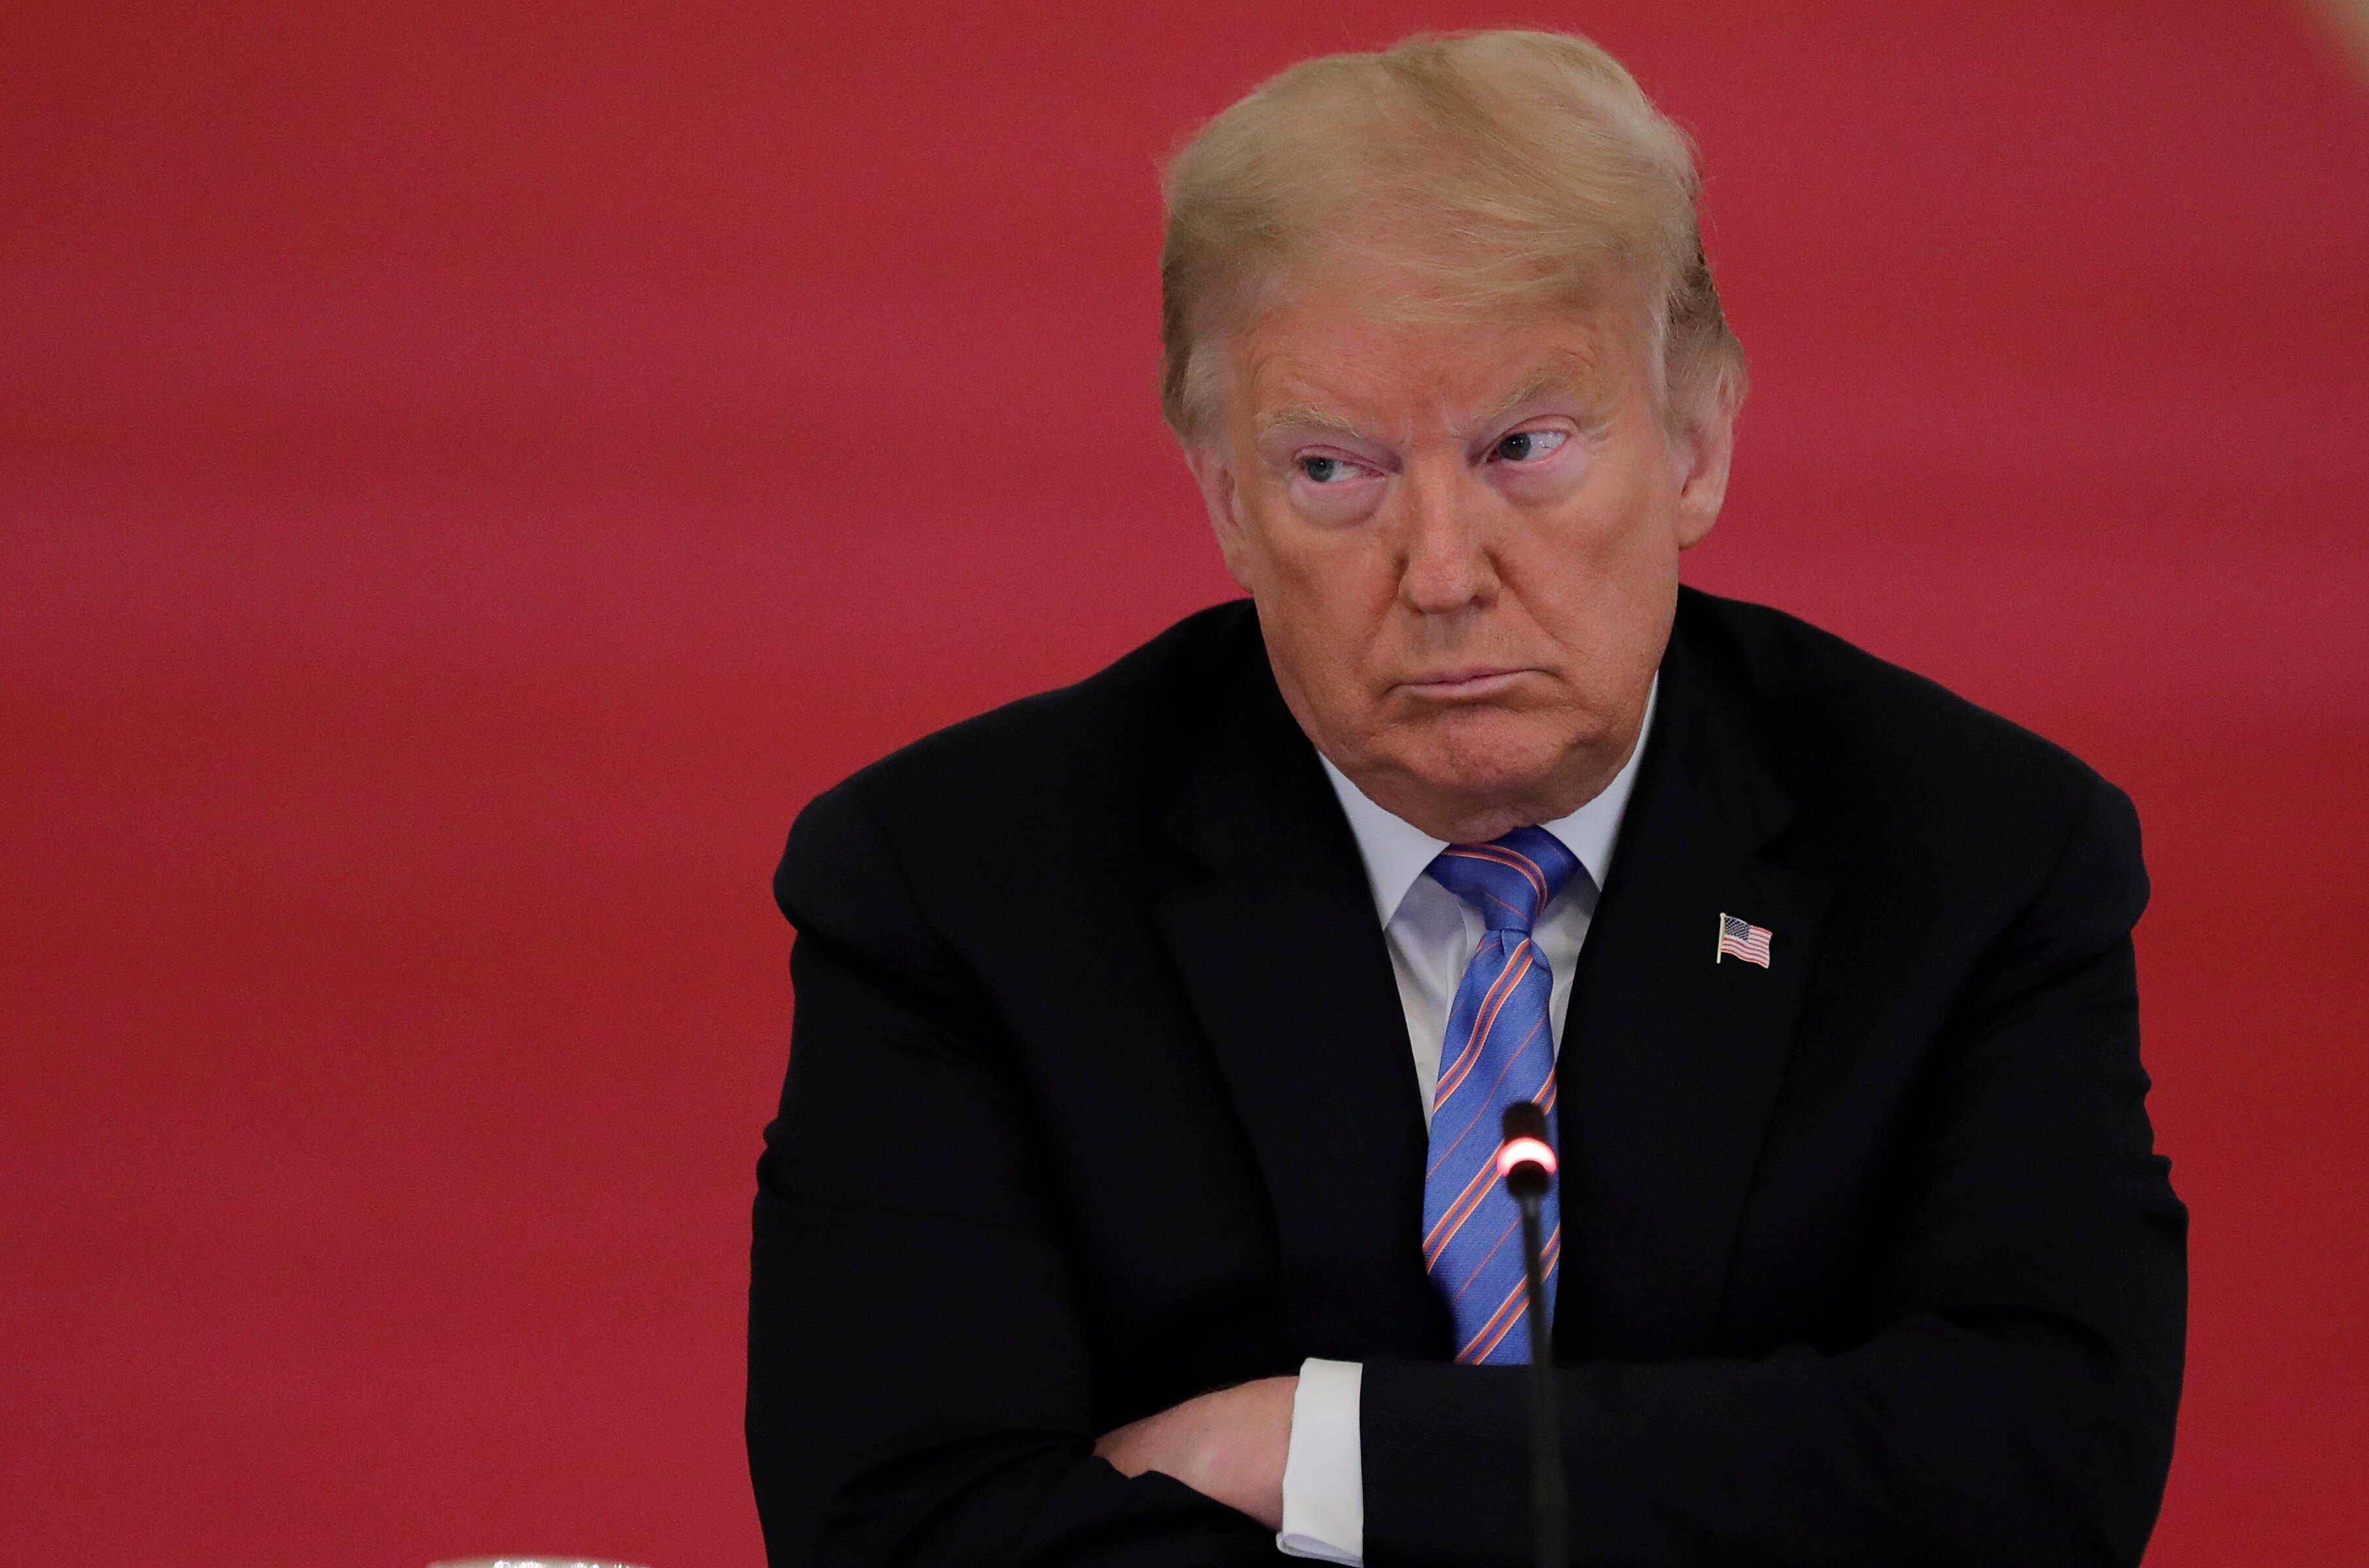 US President Donald Trump listens during a meeting of the American Workforce Policy Advisory Board in the White House on June 26. His administration has accelerated the erosion of international order and rule of law by disregarding or withdrawing from a number of institutions. Photo: Reuters